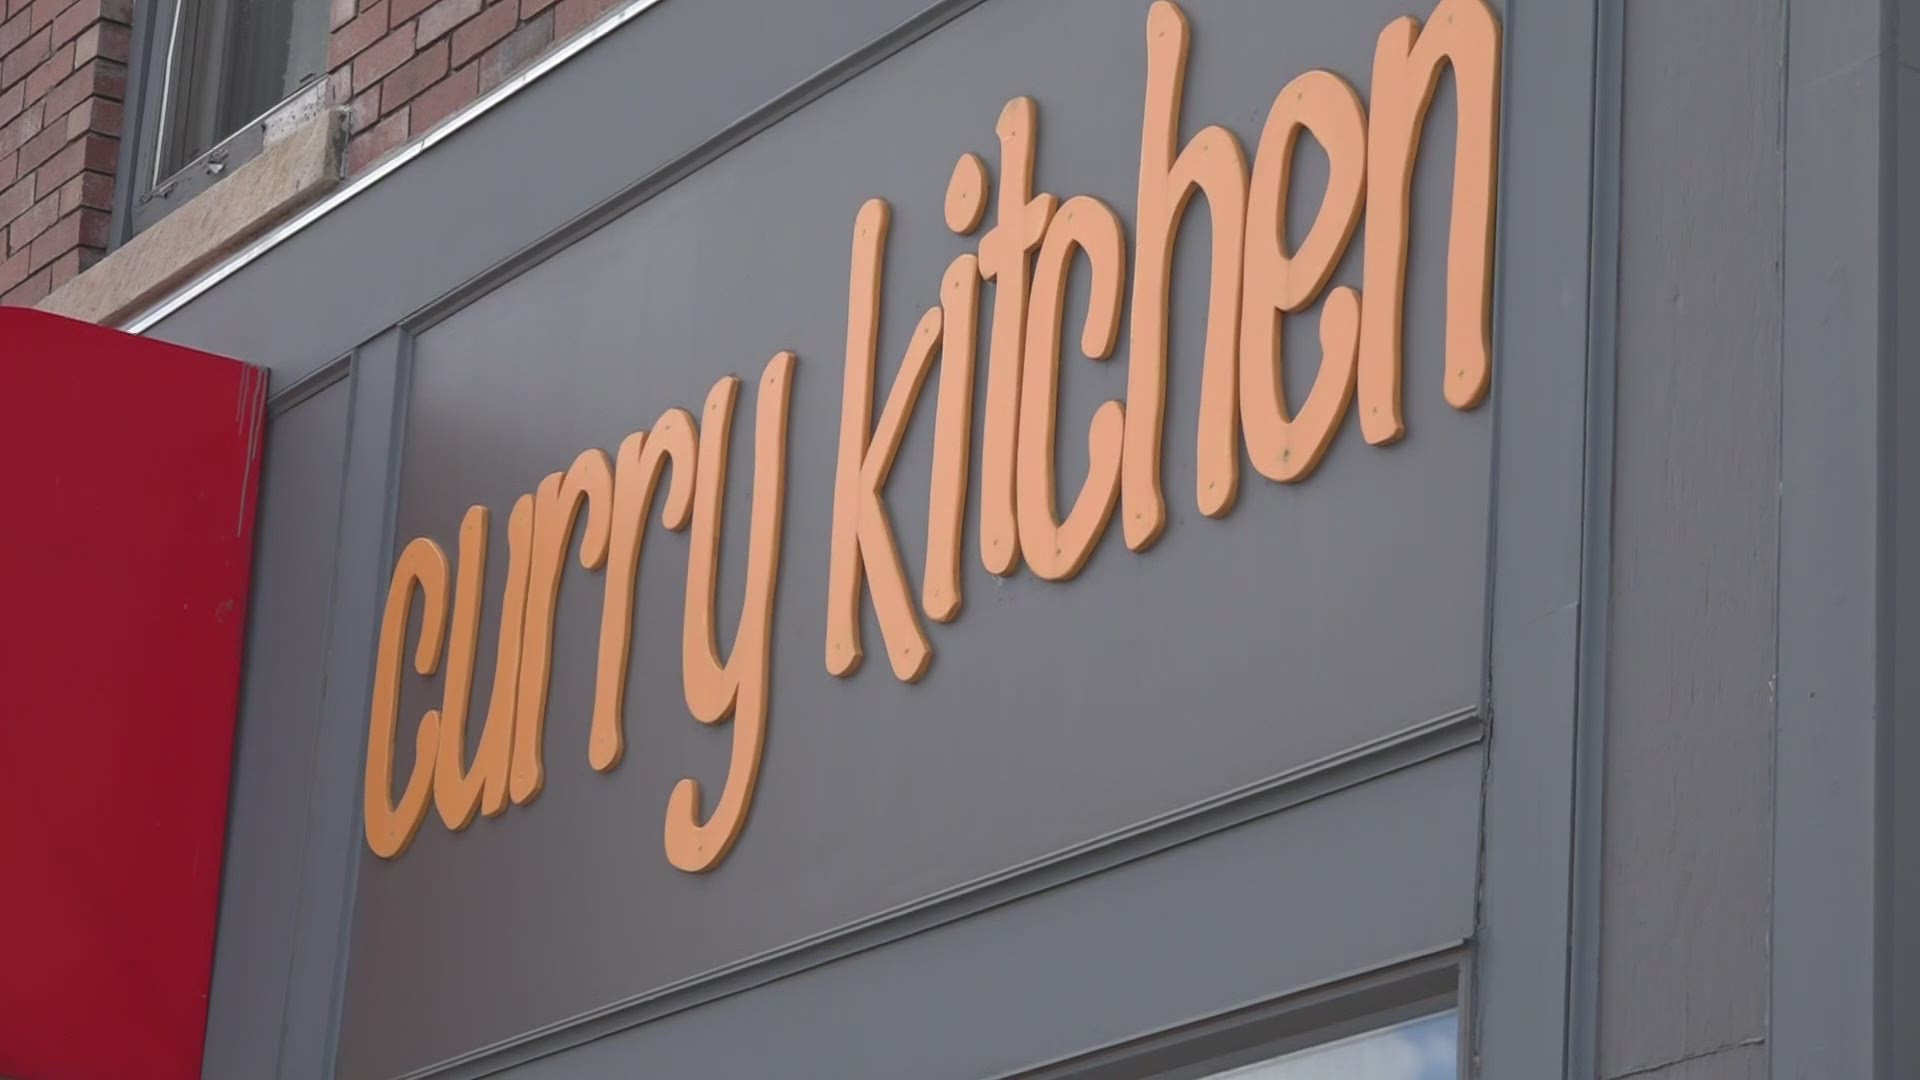 Curry Kitchen handed out 23,000 free meals to community members during the first 6 months of the pandemic. Now it needs that same community's help to survive.